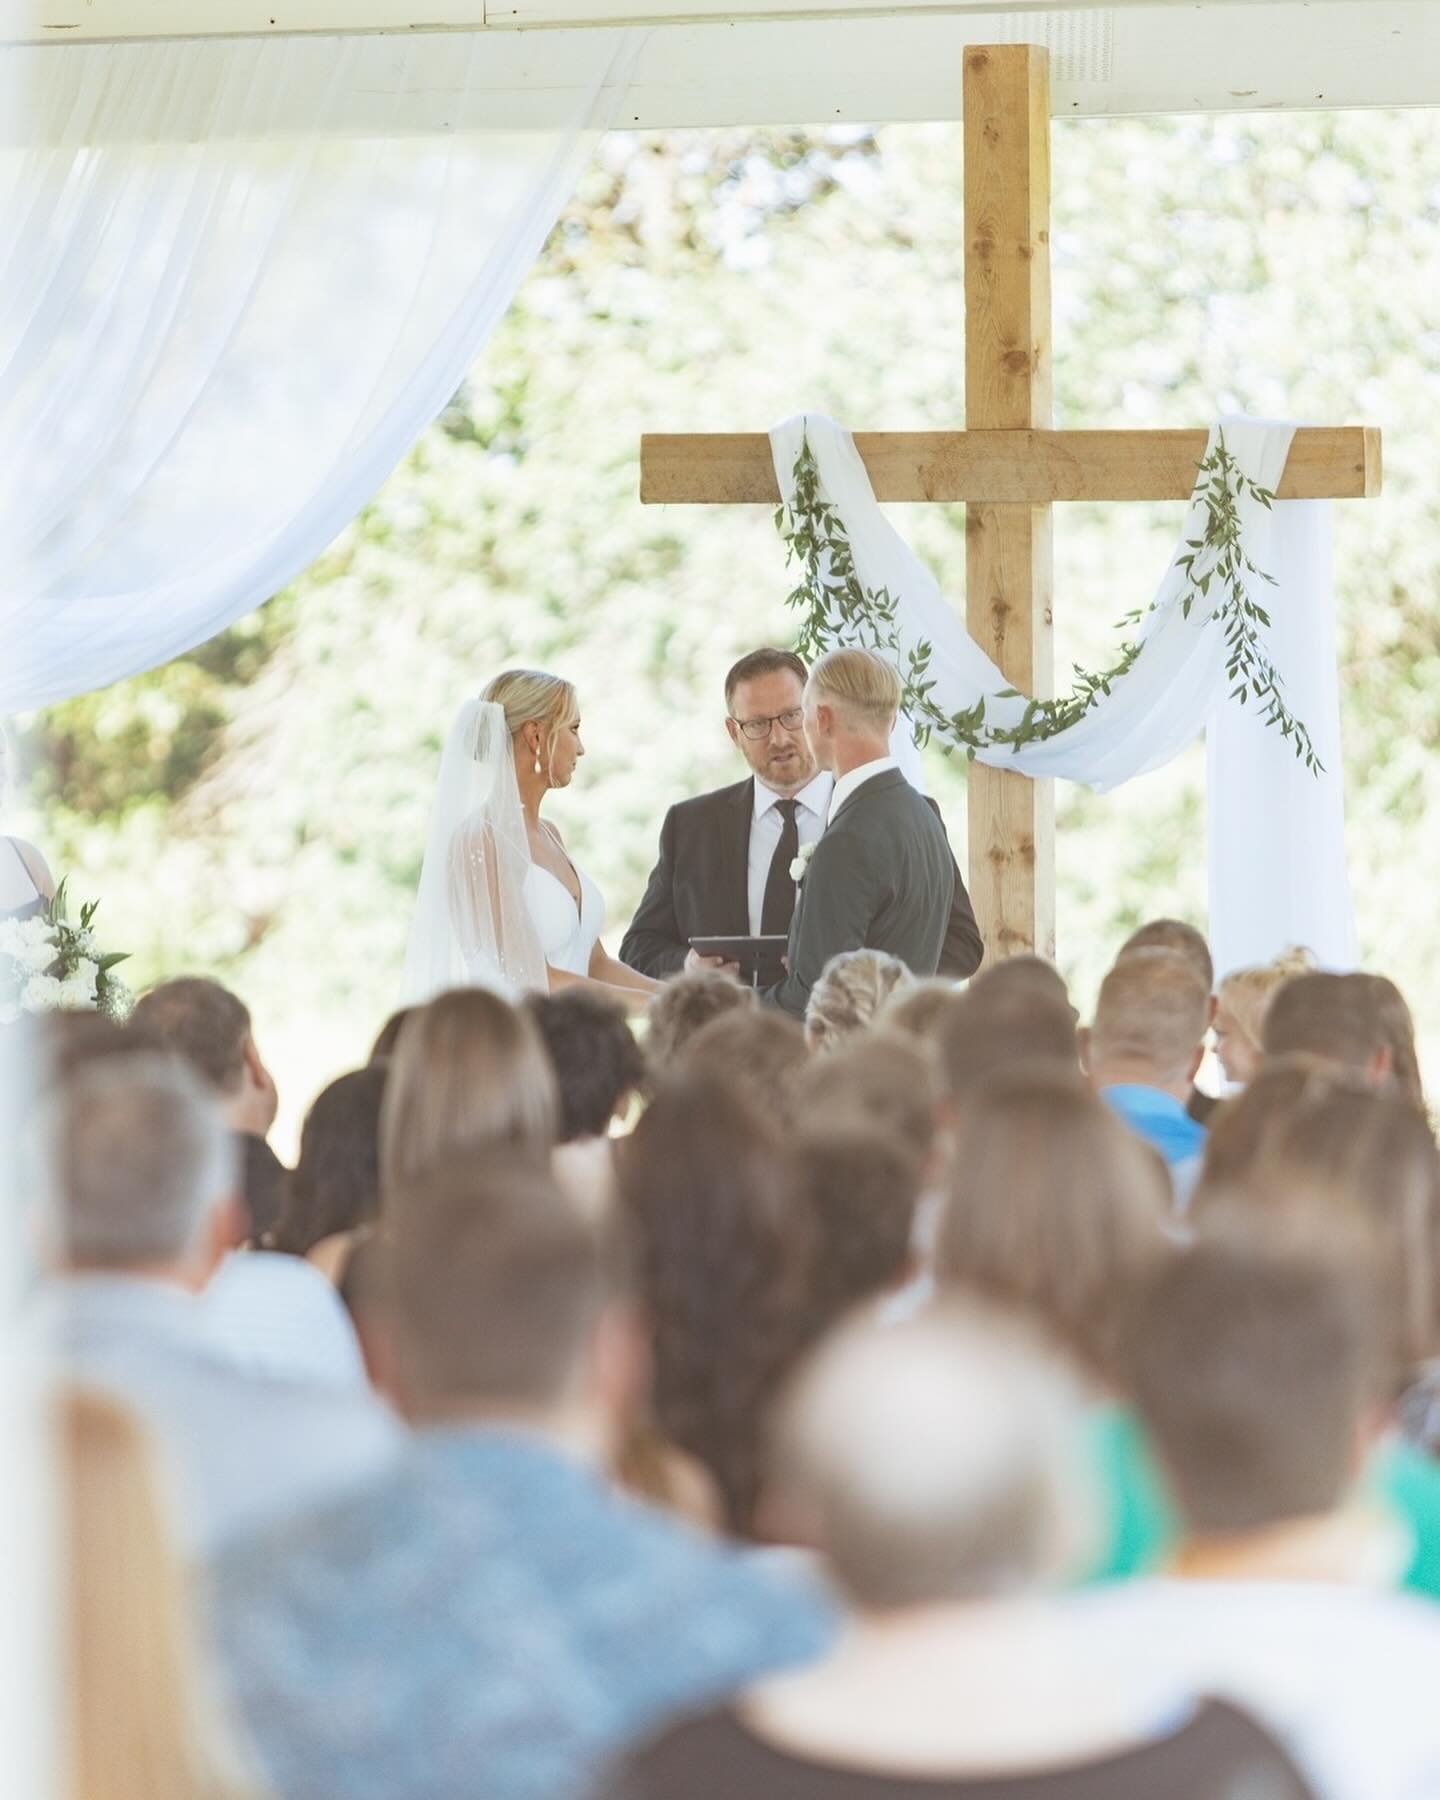 Prefer an outdoor ceremony? At Emerson Fields, your venue rental includes this option. You can choose from one of our four beautiful outdoor ceremony locations or opt for your dream wedding inside the main venue&mdash;and it&rsquo;s all INCLUDED! 🤩
